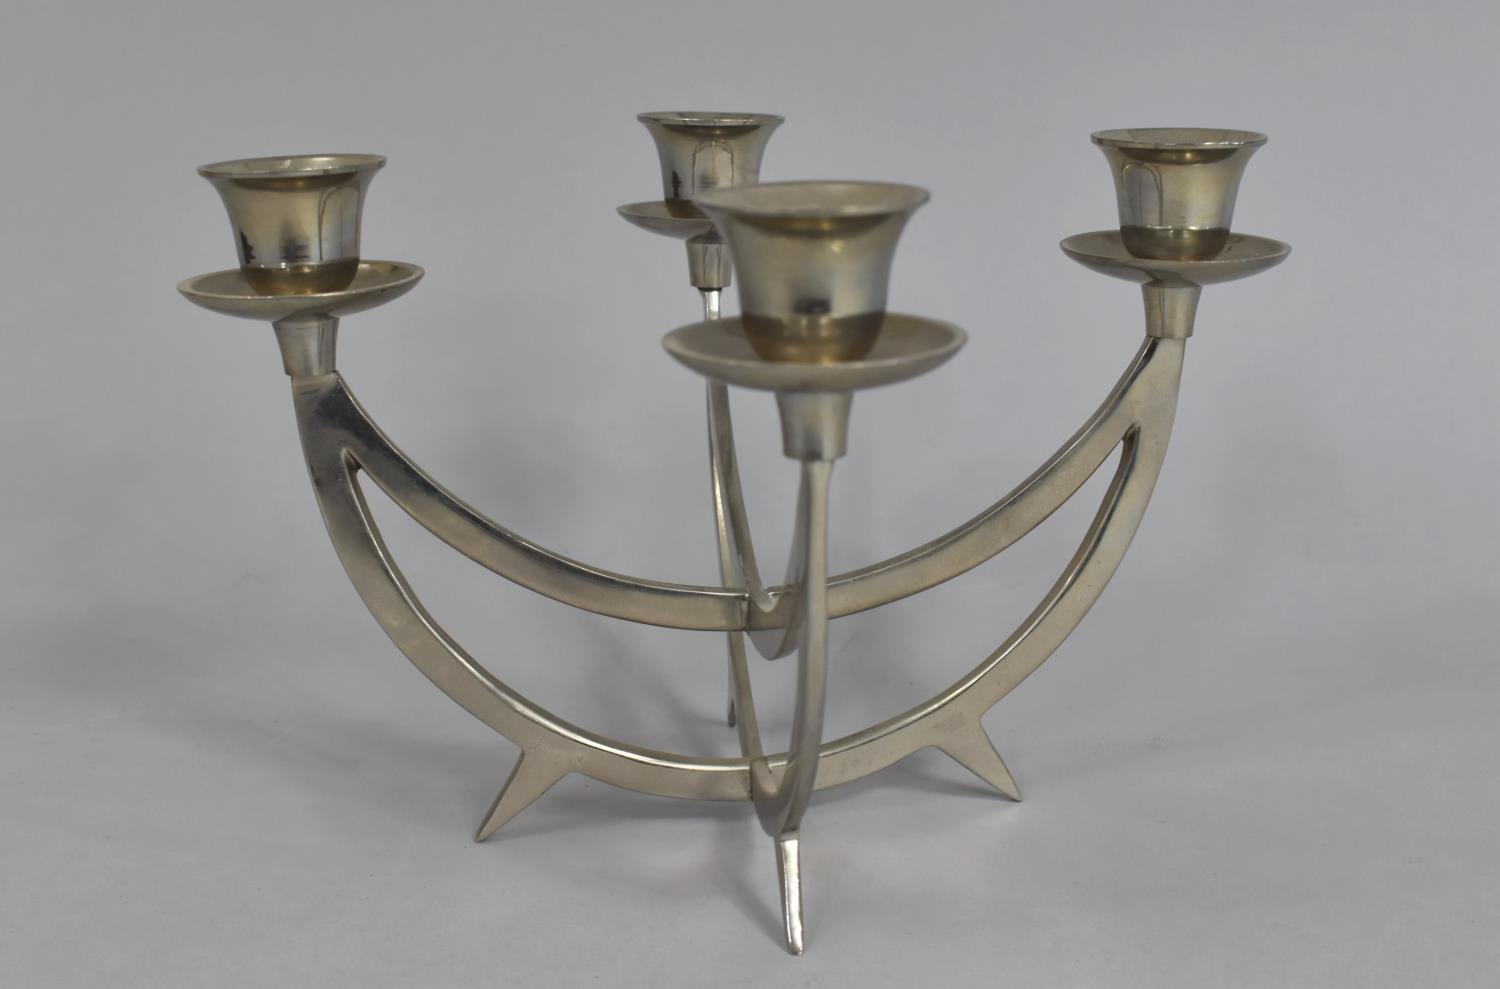 A Modern Scandinavian Style Four Branch Table Candelabra, 15cms High - Image 2 of 4